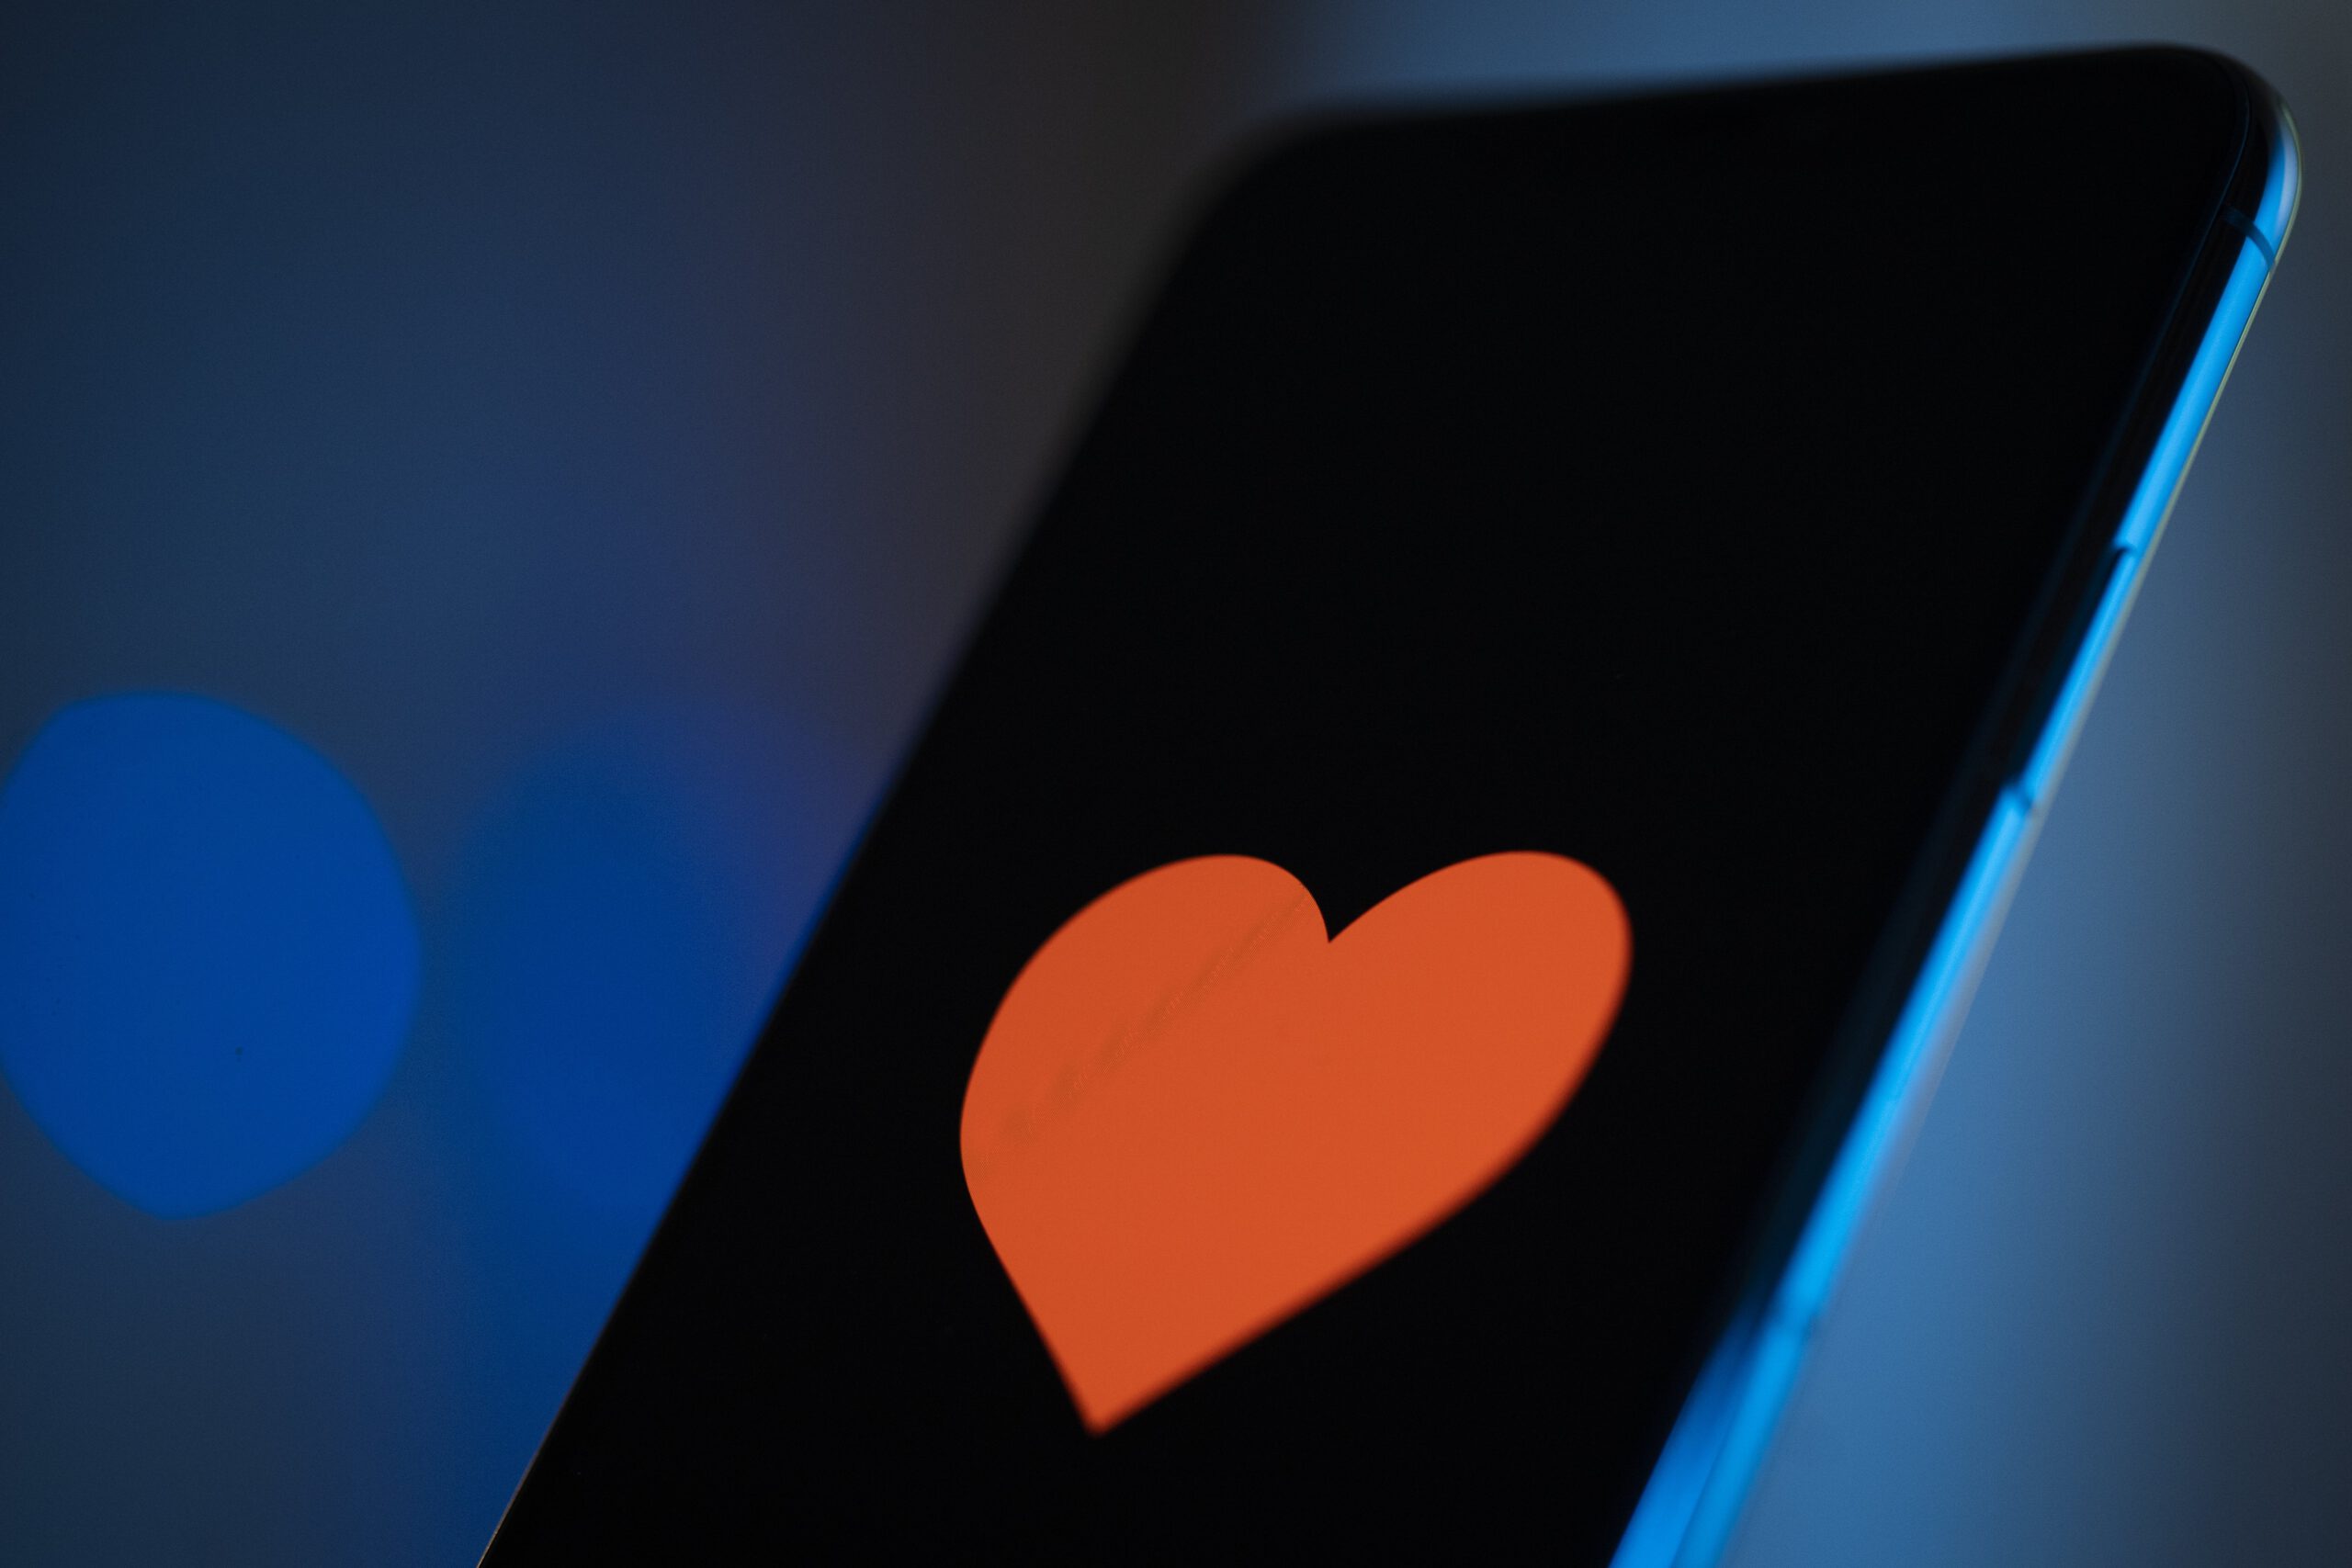 A heart emoji is seen on an iPhone 11 Pro Max in this illustration photo in Warsaw, Poland on April 4, 2020.